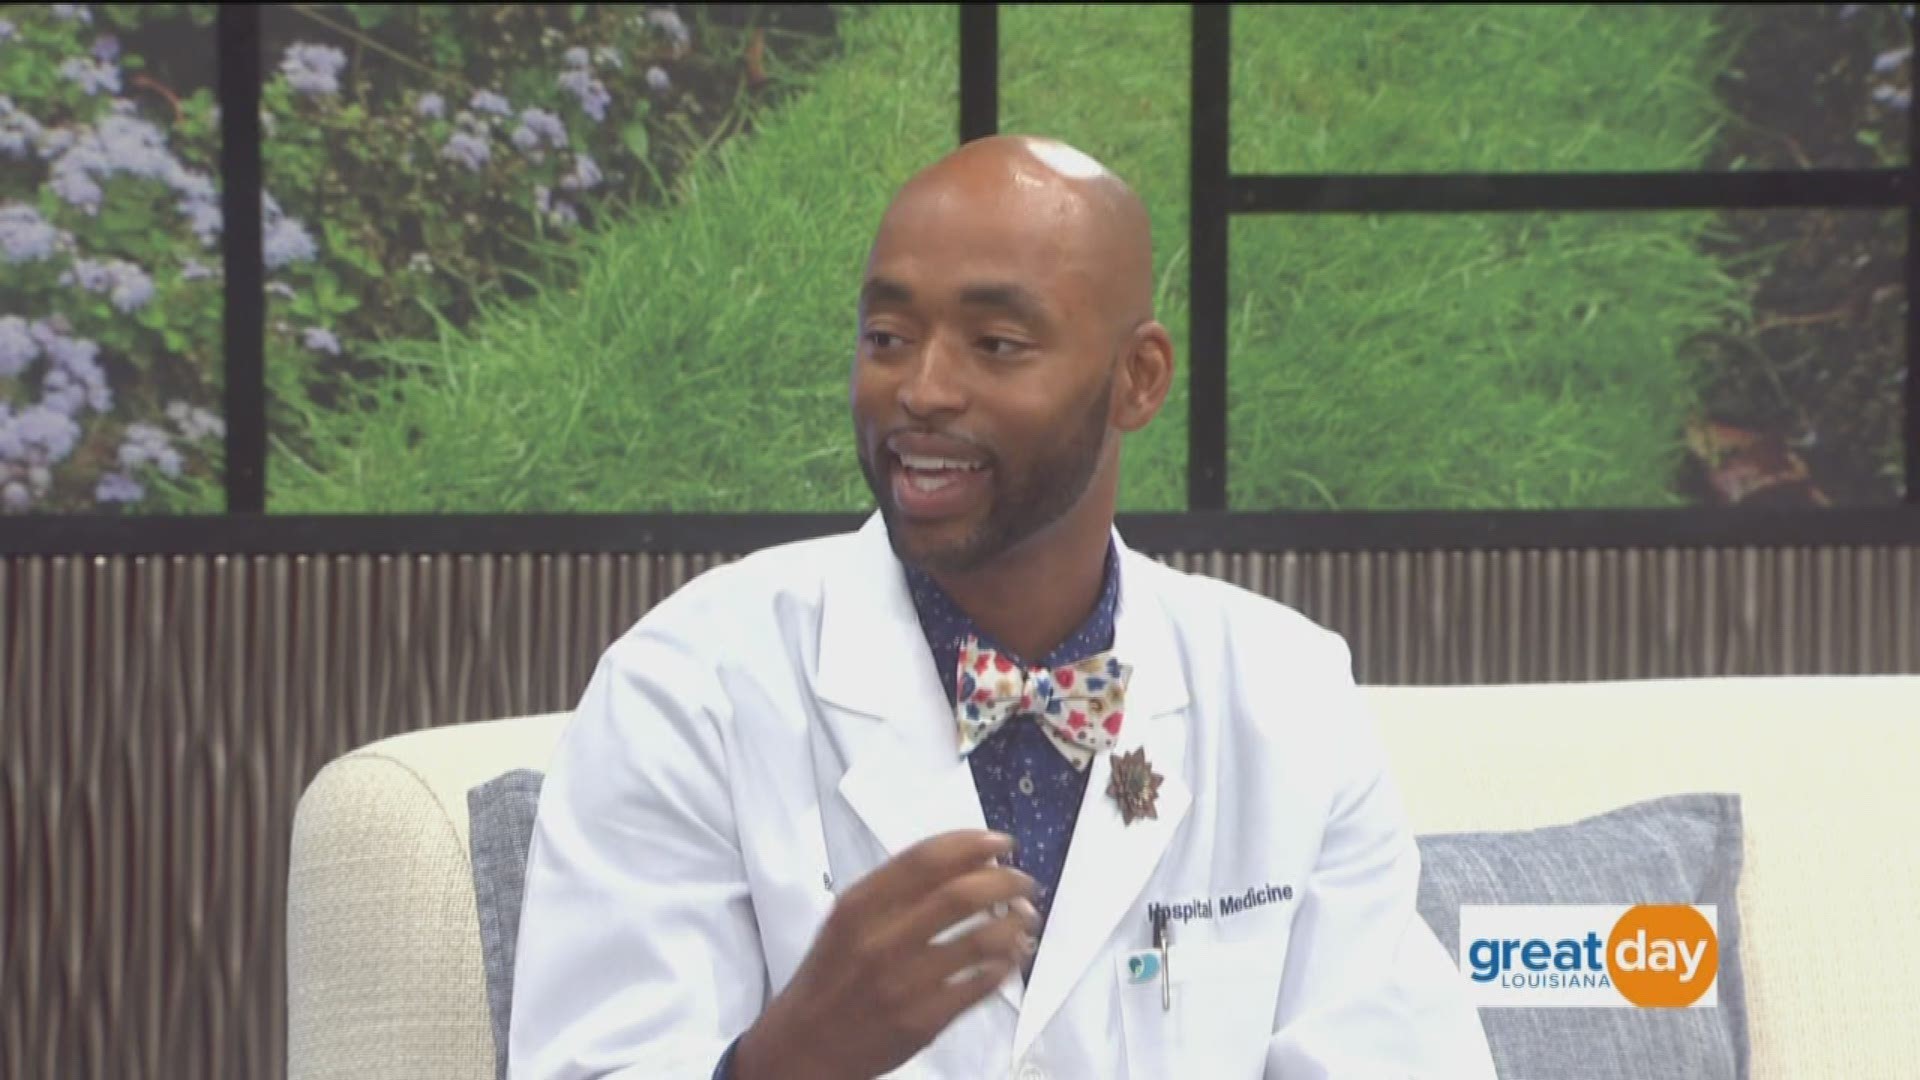 Dr. Bruce Wilson, Volunteer Expert with the American Heart Association, joins us with tips on how to keep you cholesterol under control.